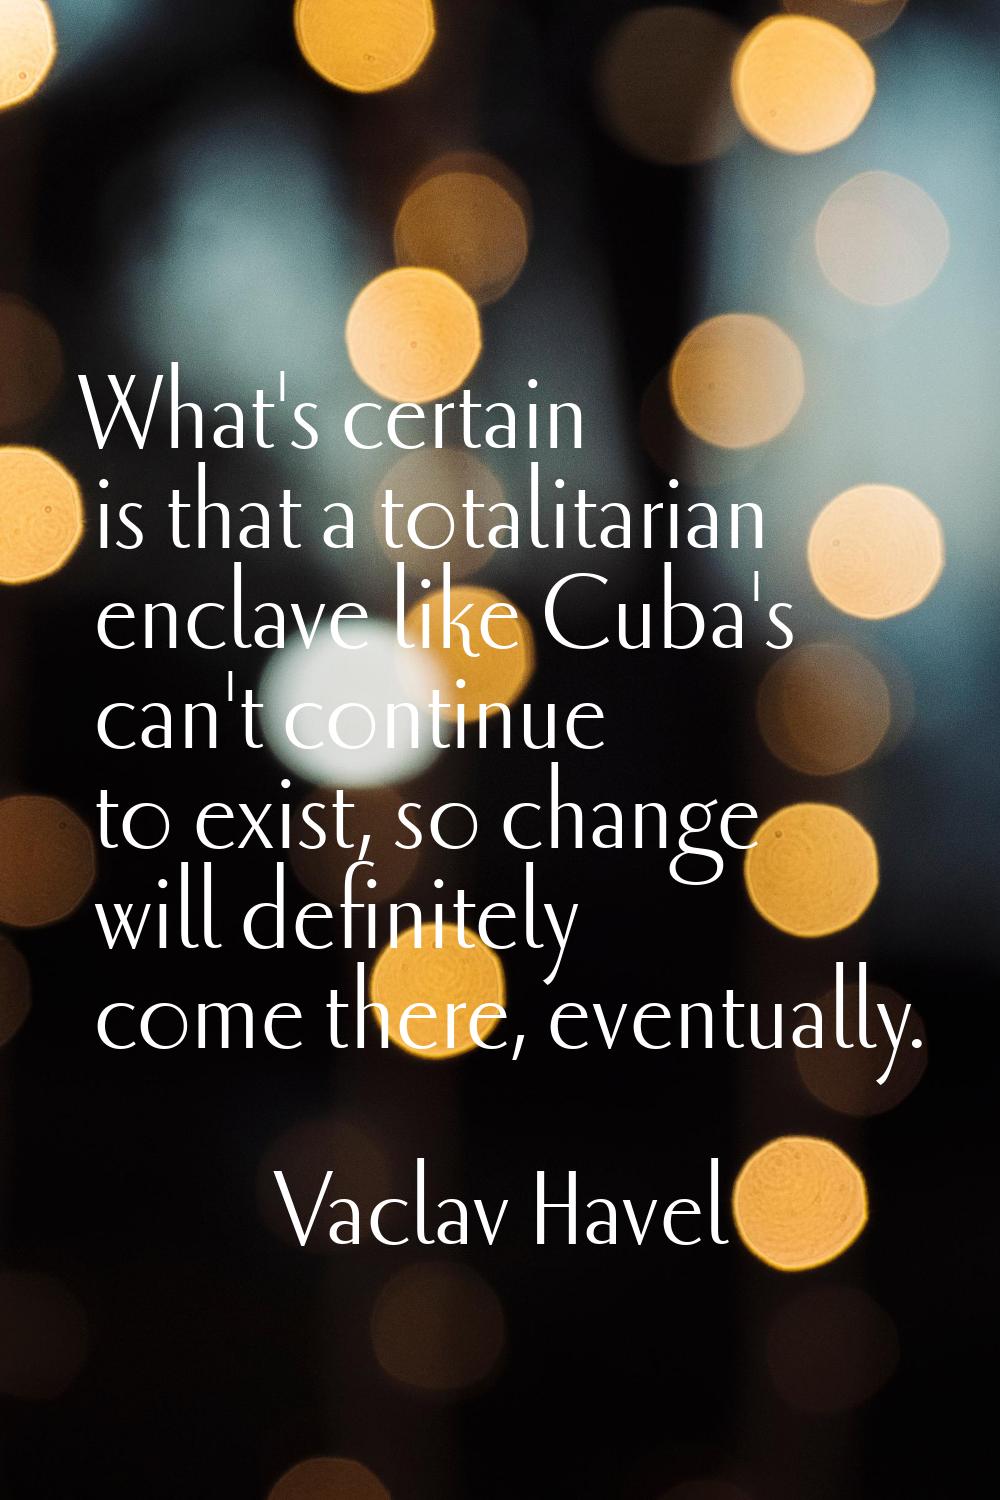 What's certain is that a totalitarian enclave like Cuba's can't continue to exist, so change will d